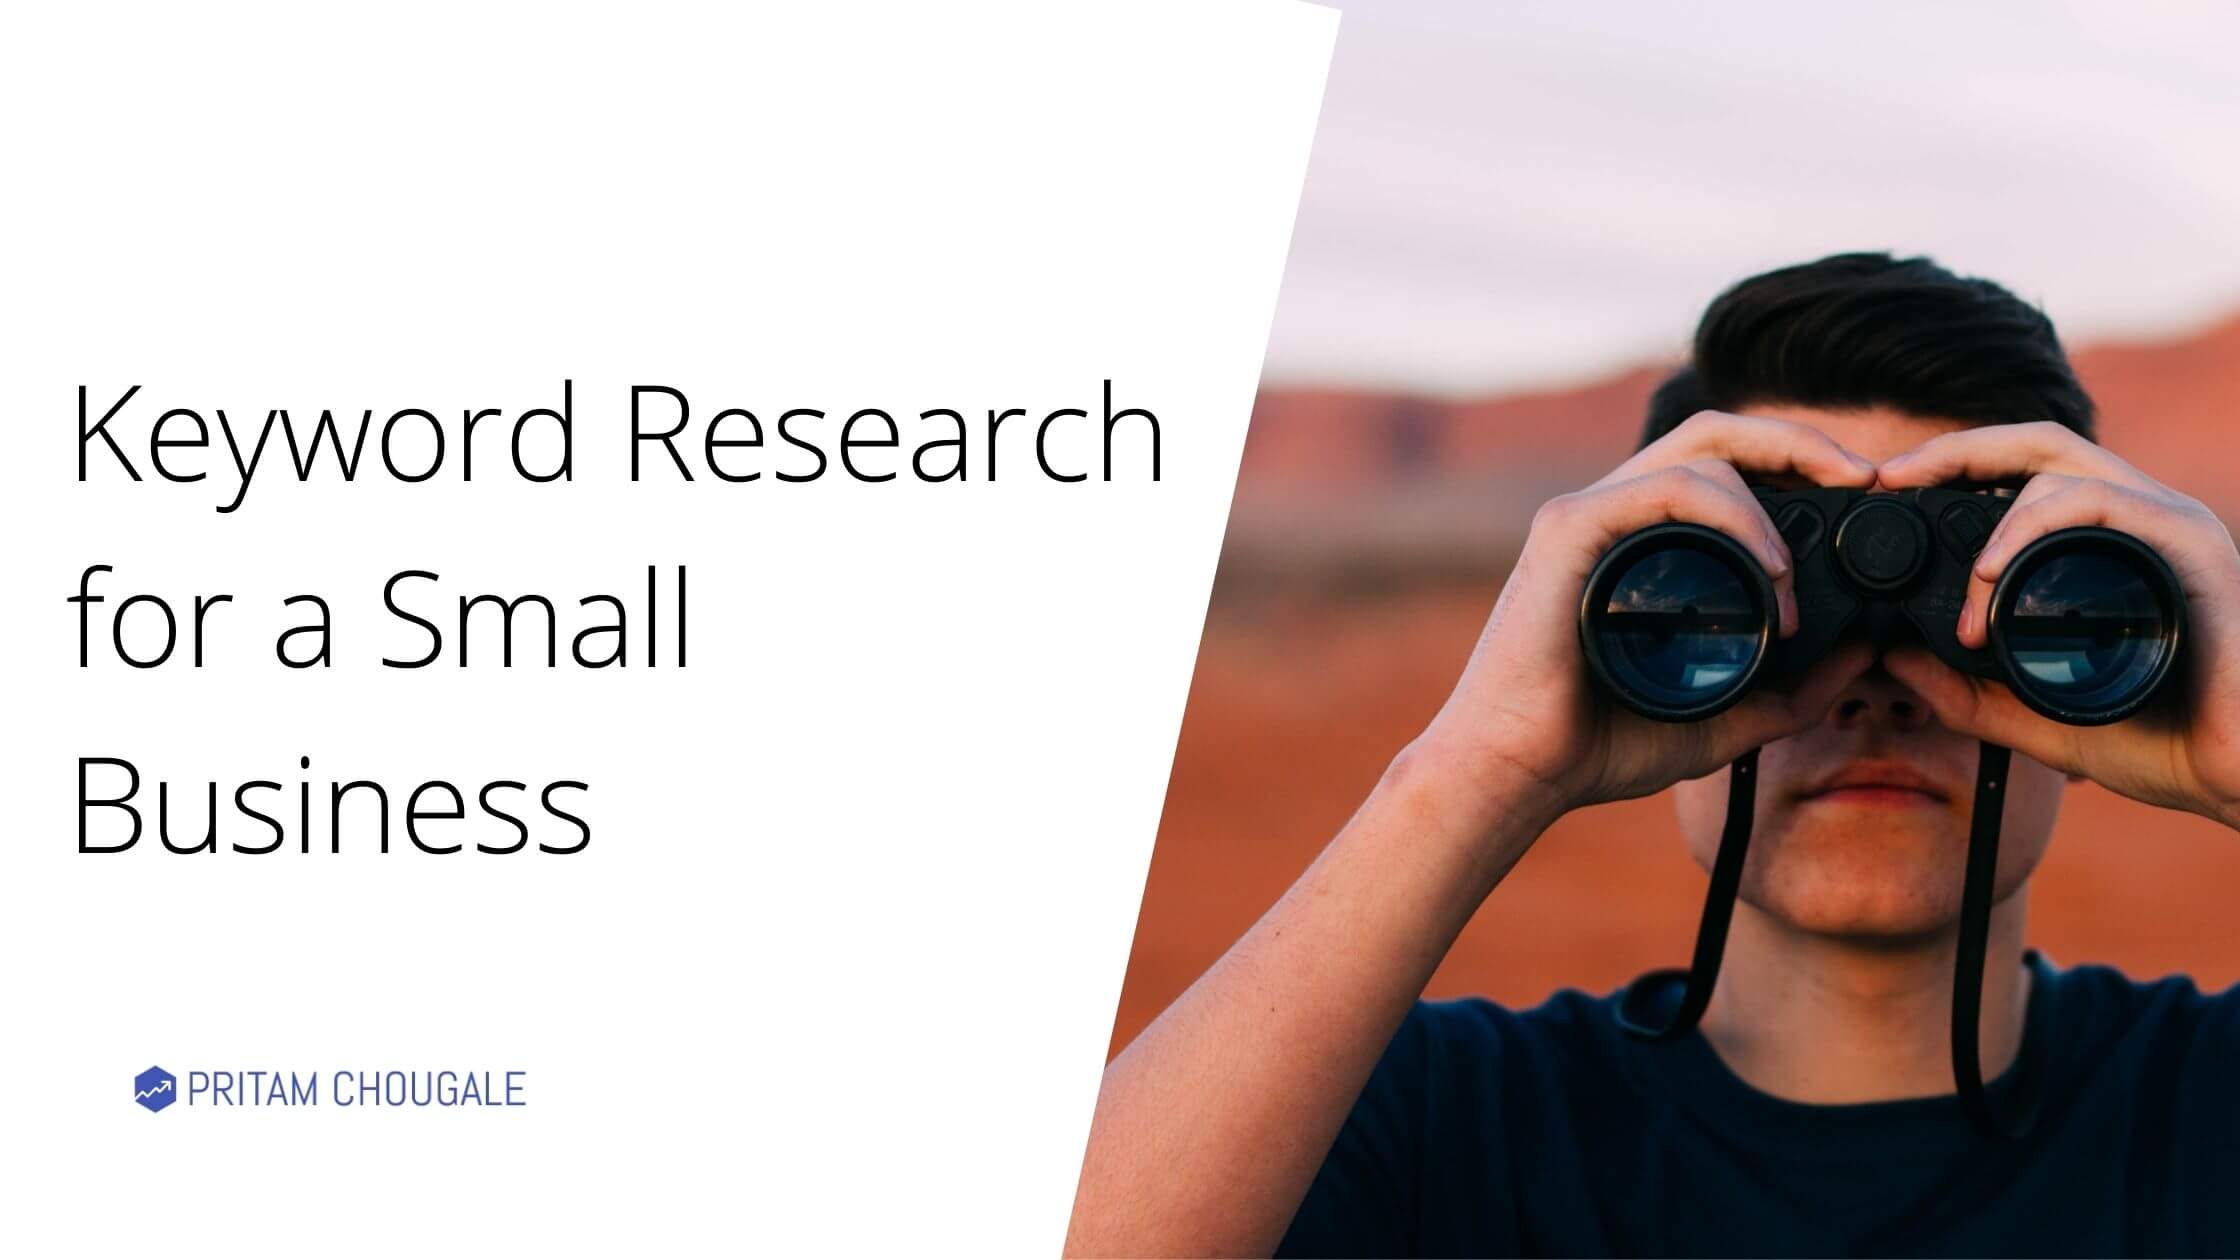 Keyword Research for a Small Business